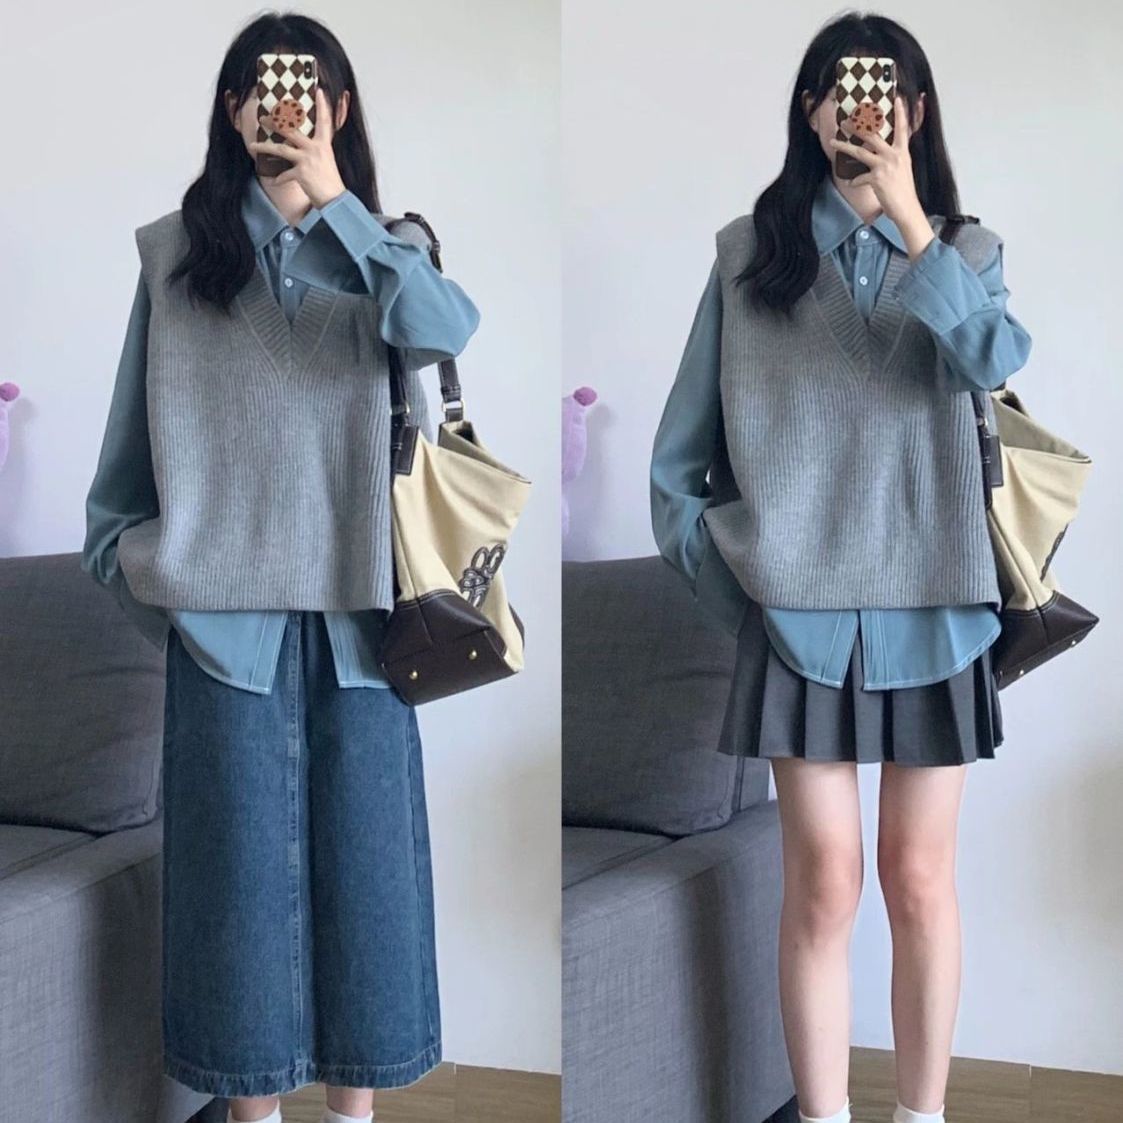 Three-piece suit autumn retro niche fashion knitted sweater layered vest collocation shirt women's pleated short skirt